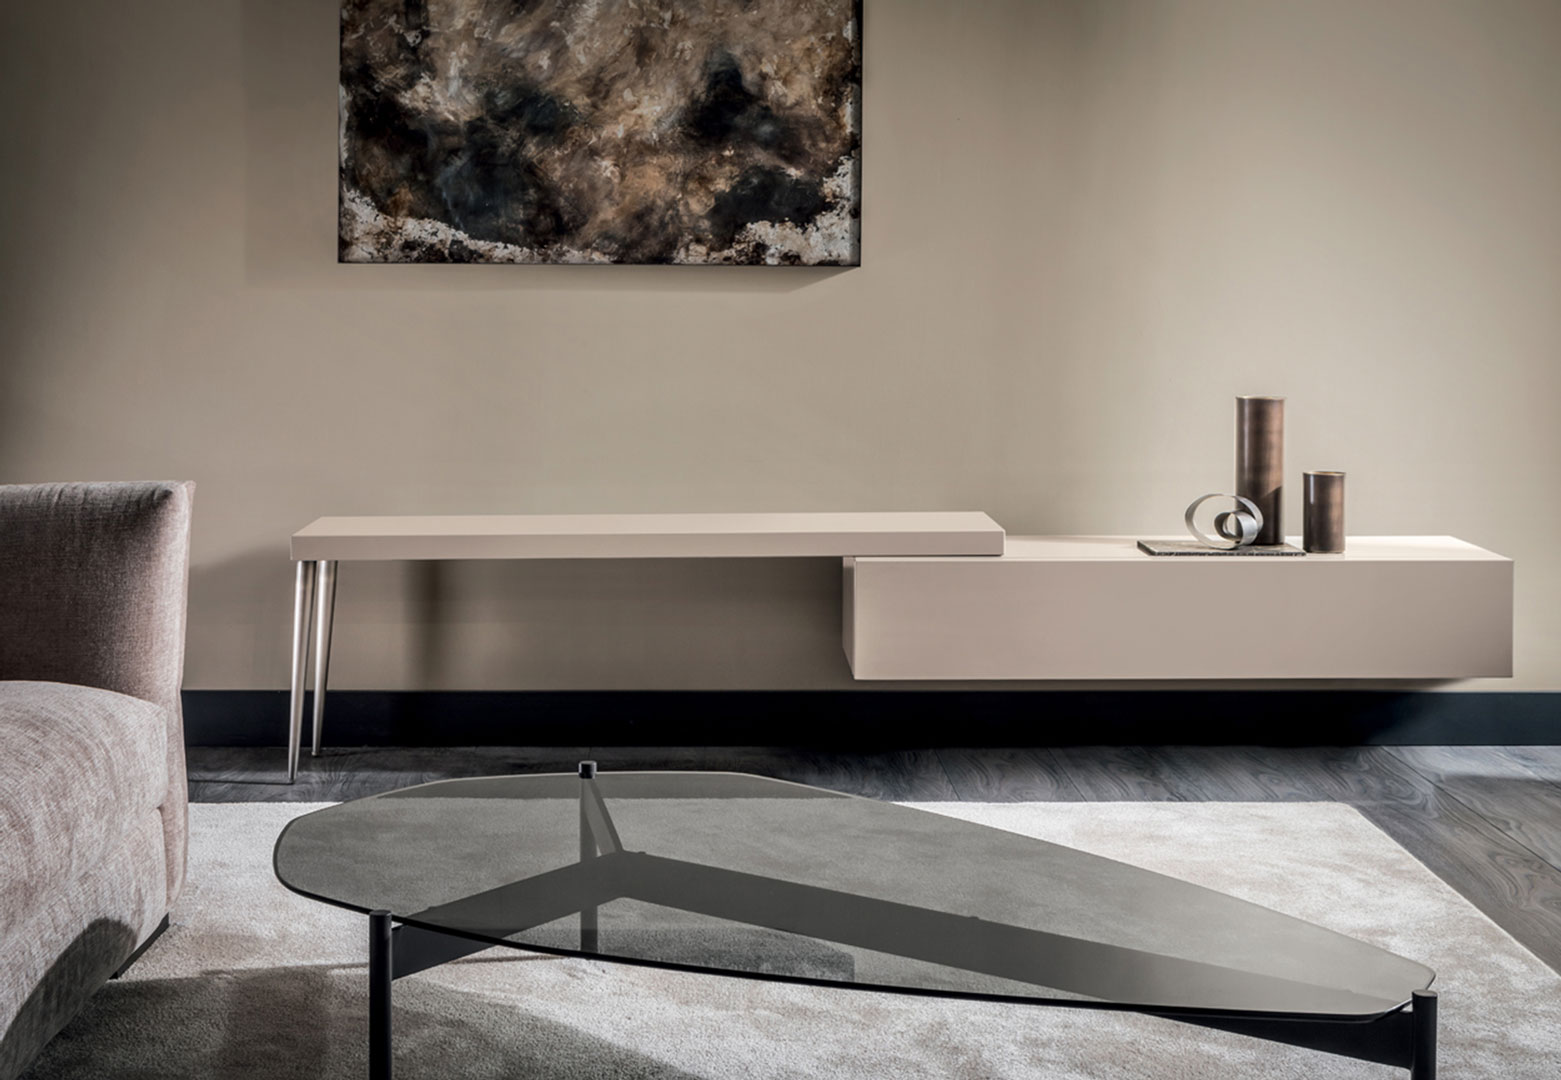 The TV stand, unusual, elegant and refined - Cantori